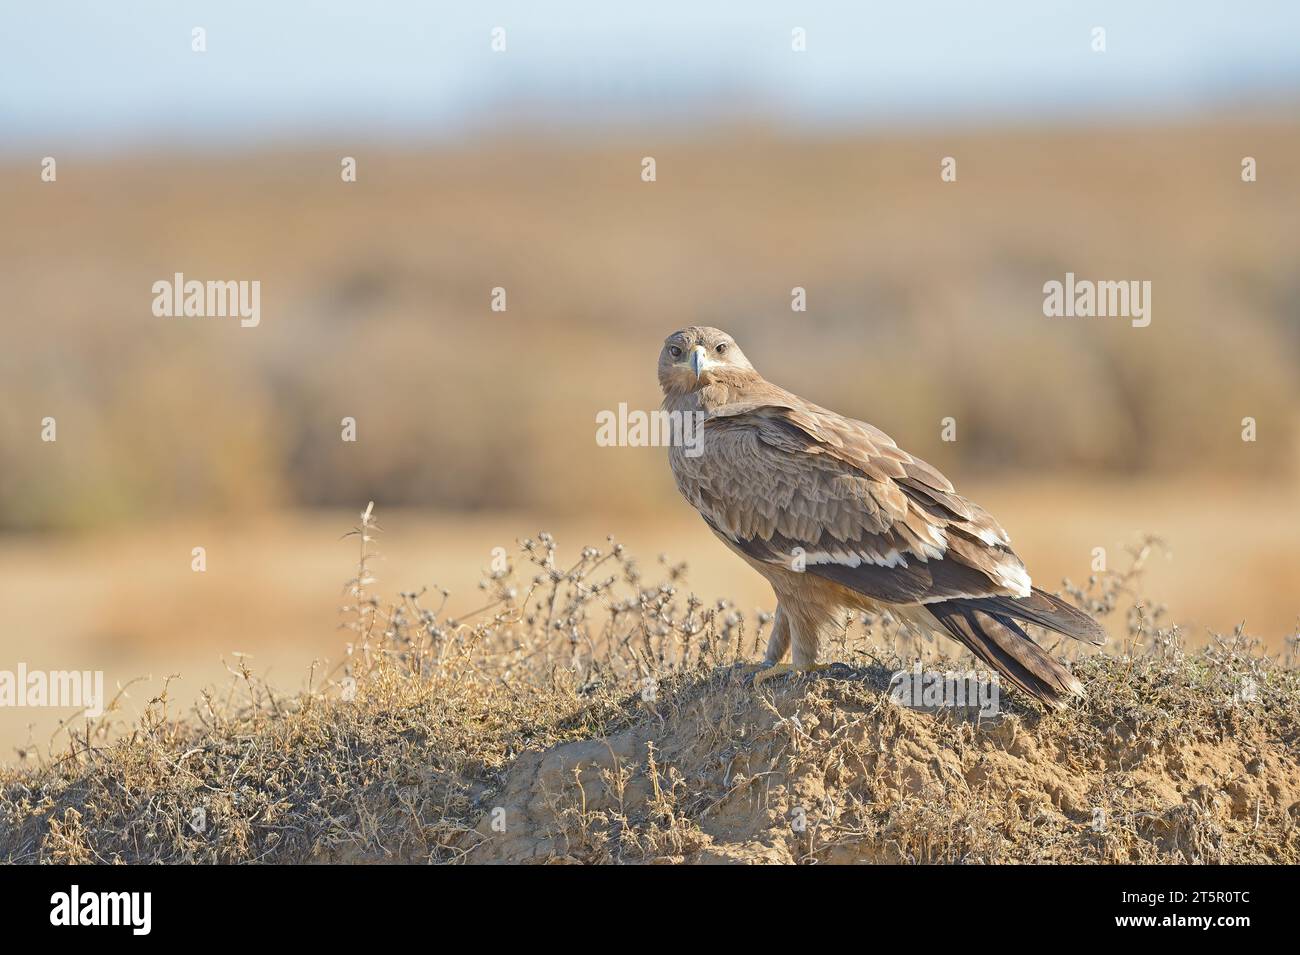 Steppe Eagle, Aquila nipalensis, sitting on grass in meadow, dried wetland plants in the background, Turkey. Stock Photo